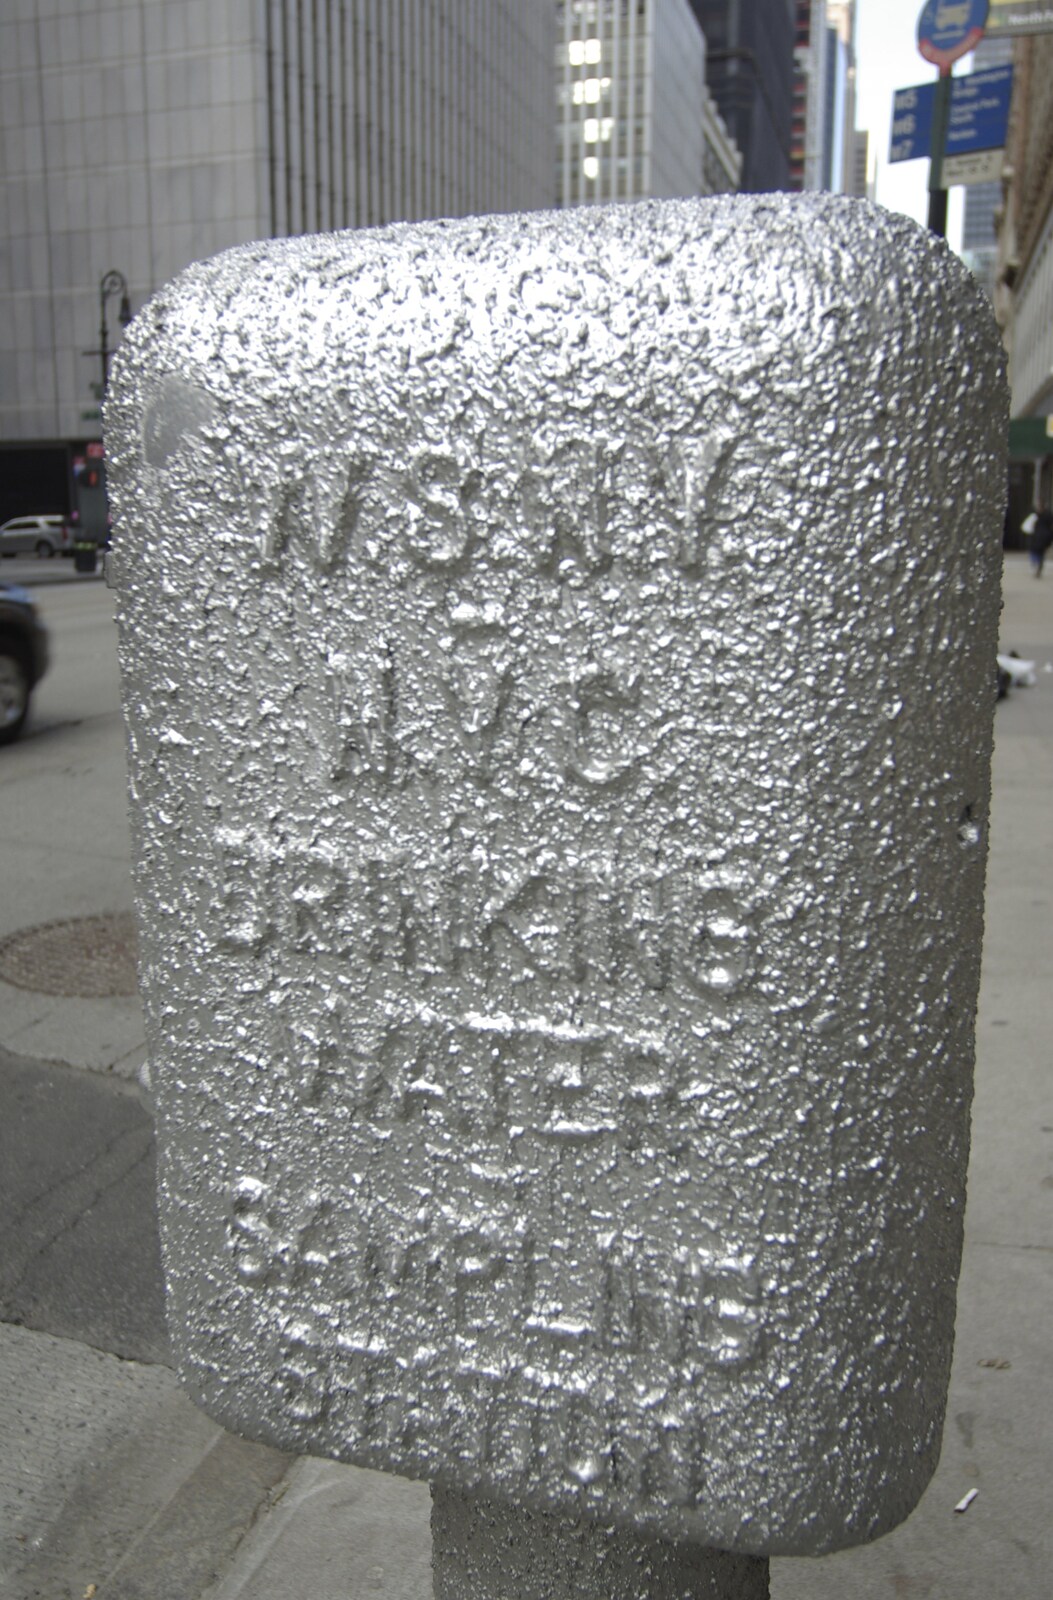 Persian Day Parade, Upper East Side and Midtown, New York, US - 25th March 2007: A silver drinking water sample point